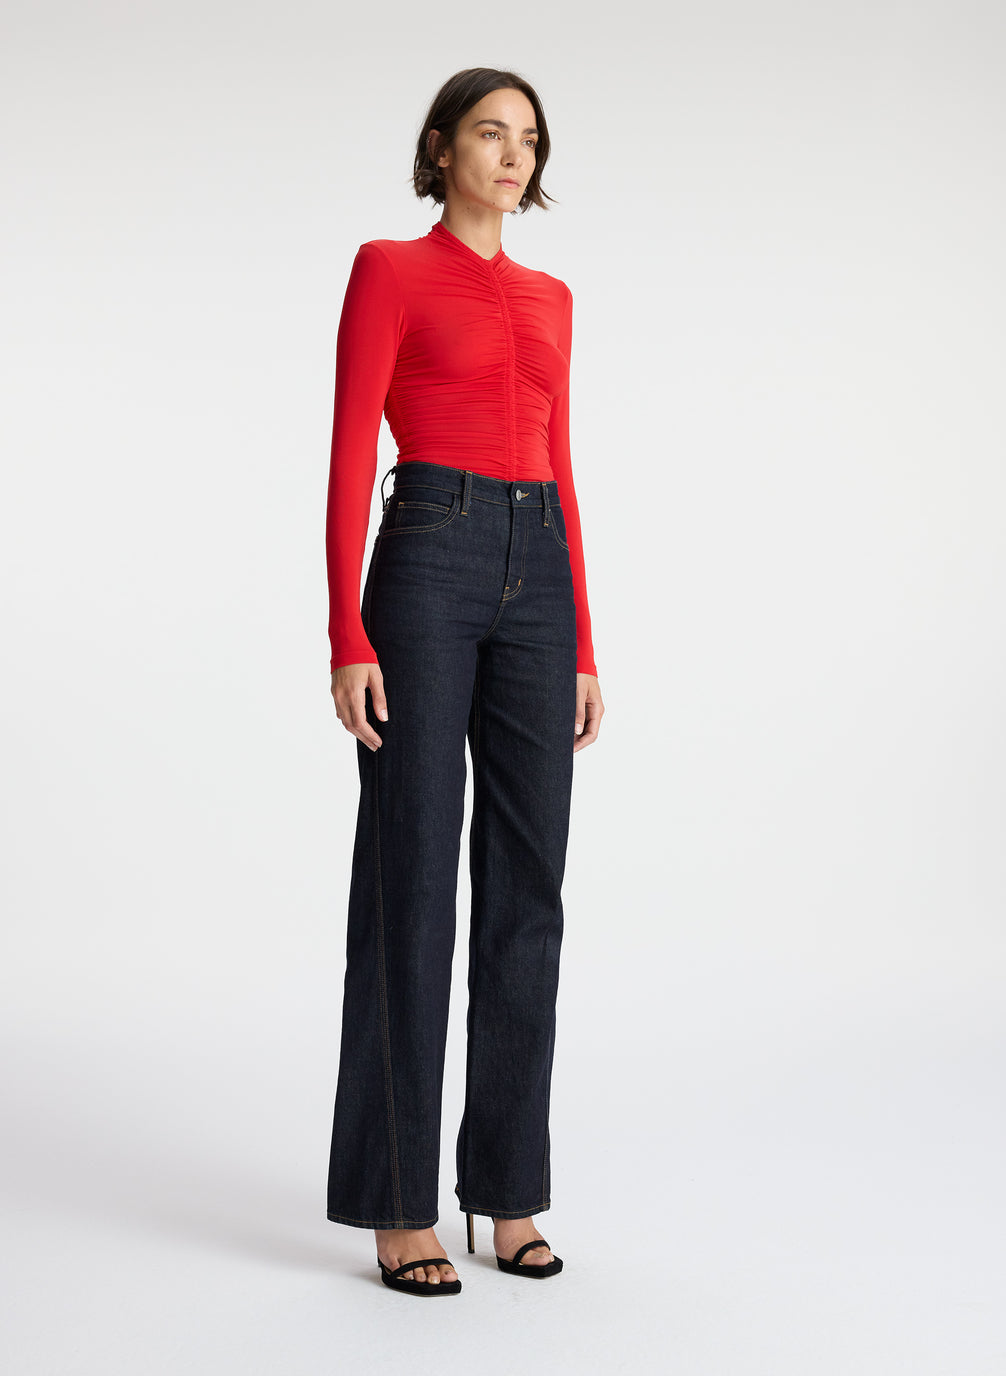 side view of woman wearing red ruched long sleeve top and dark wash jeans